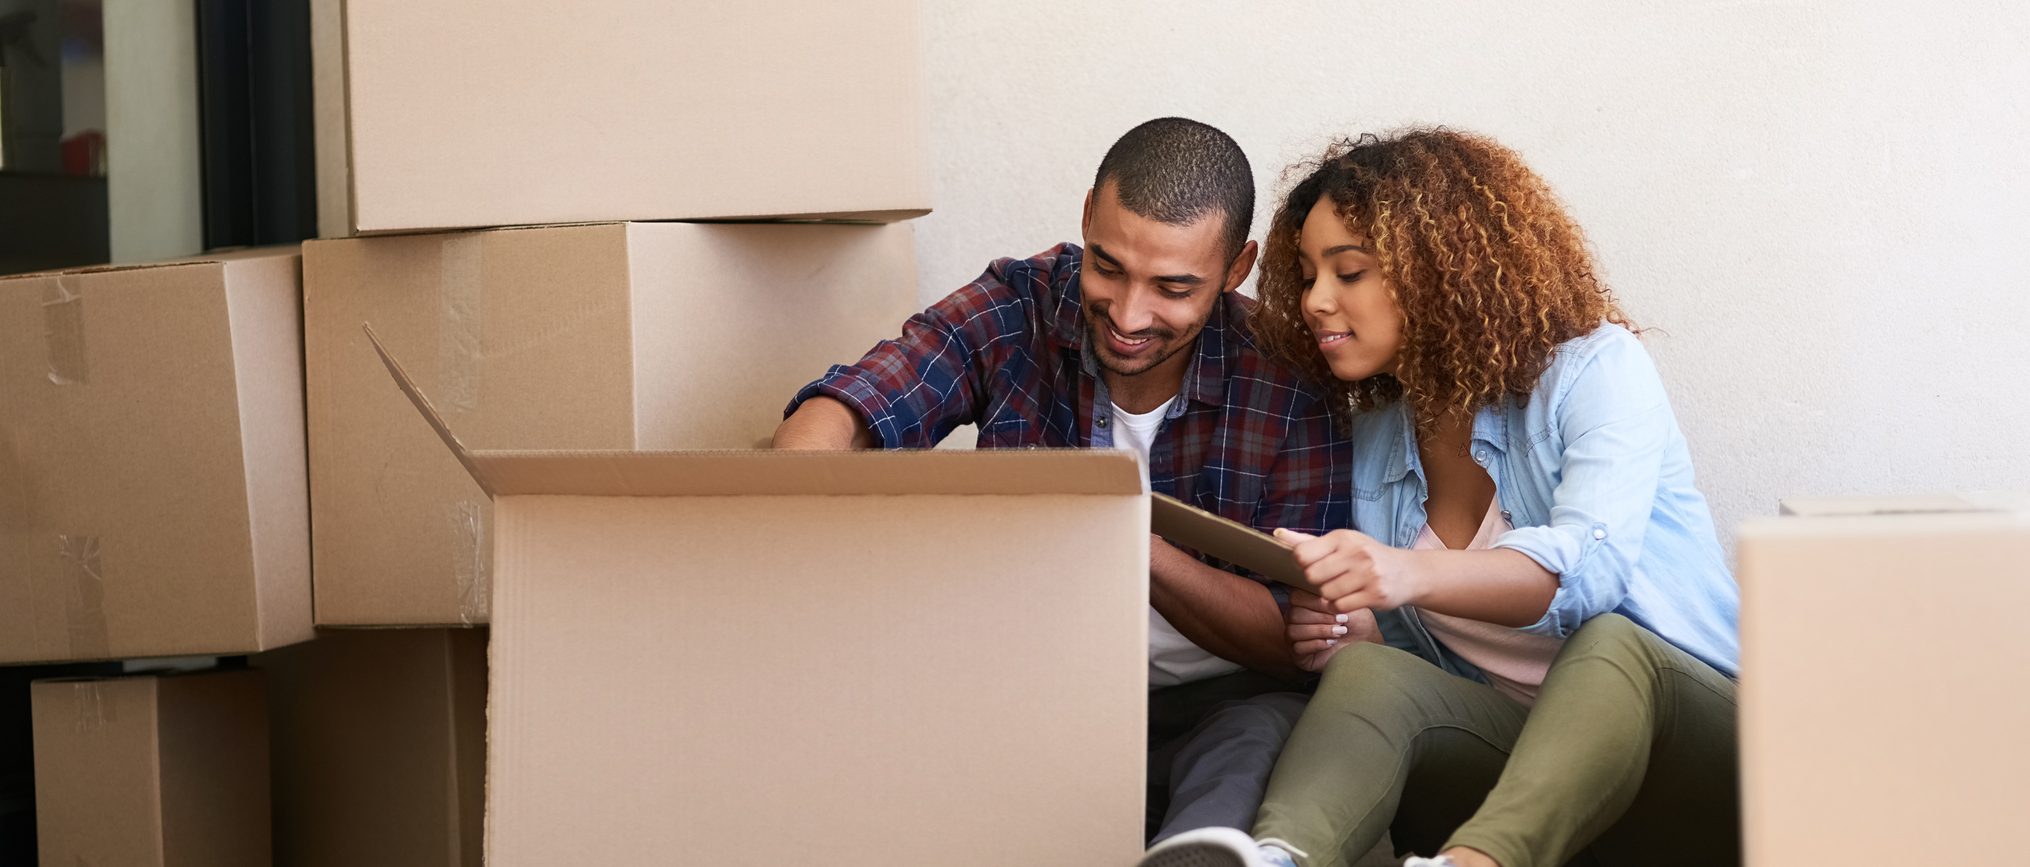 Online checking gives you one less thing to worry about during your move